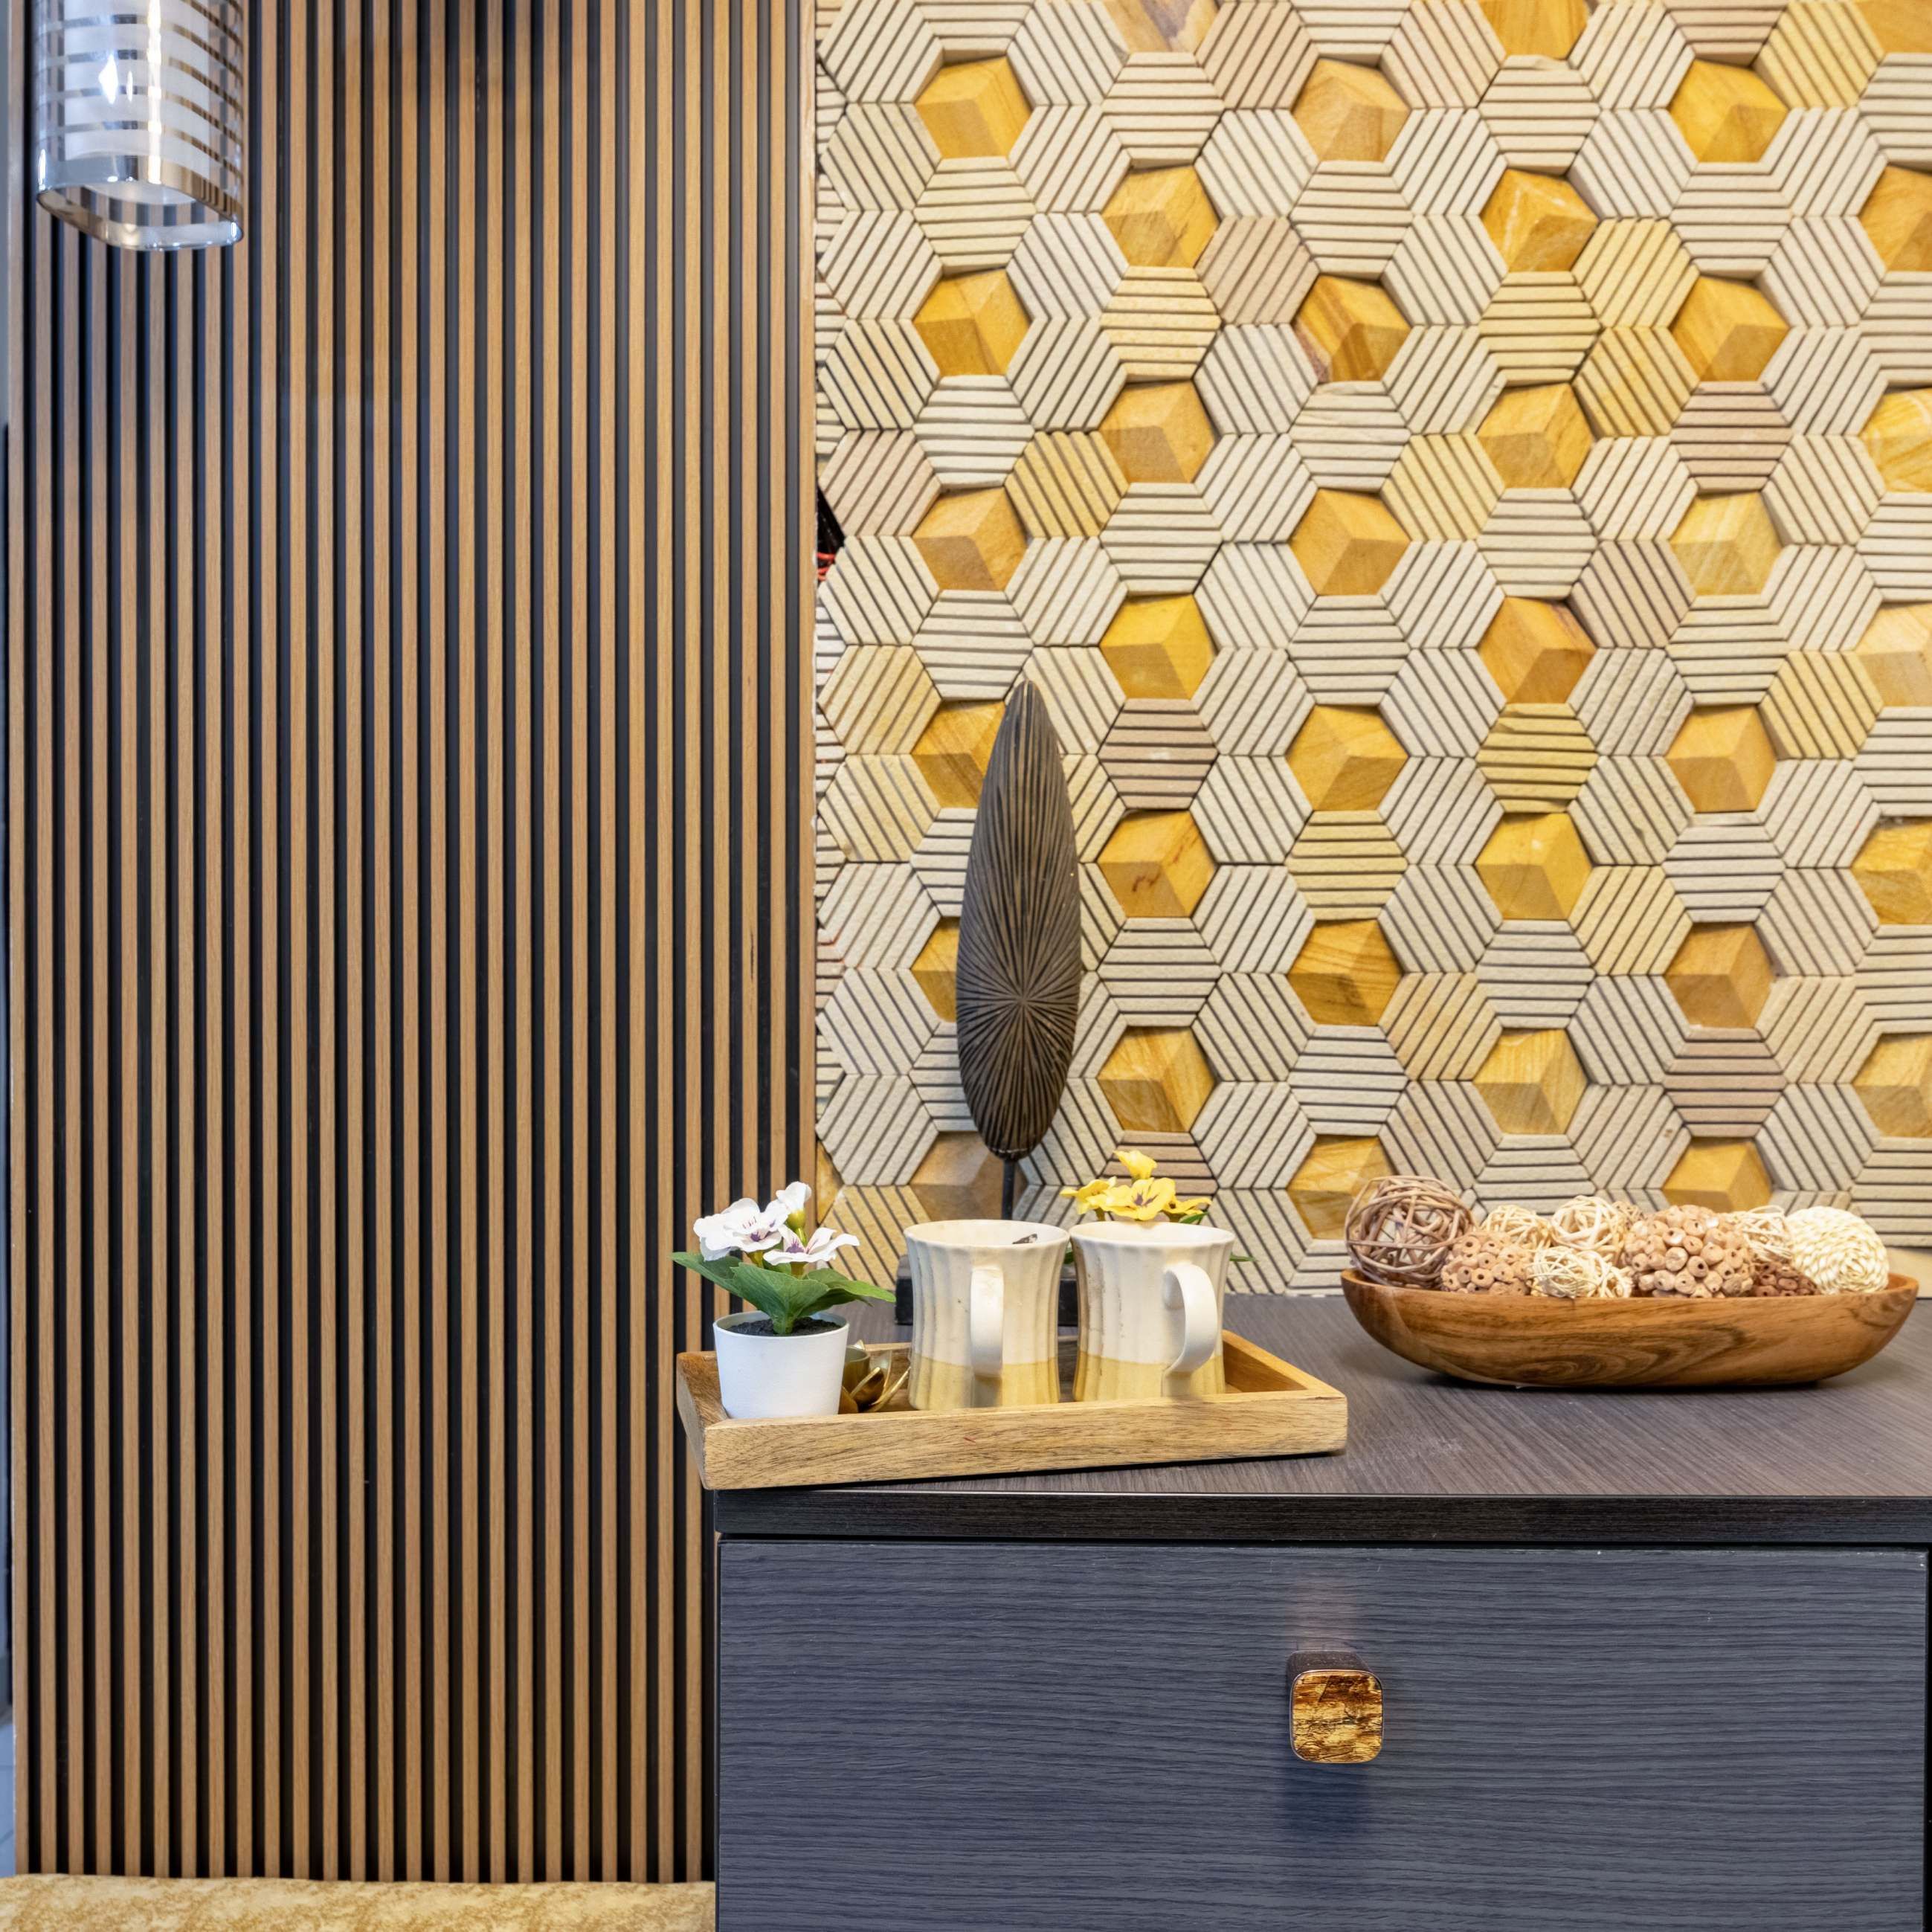 Modern Wall Design With Geometric Wall Panelling